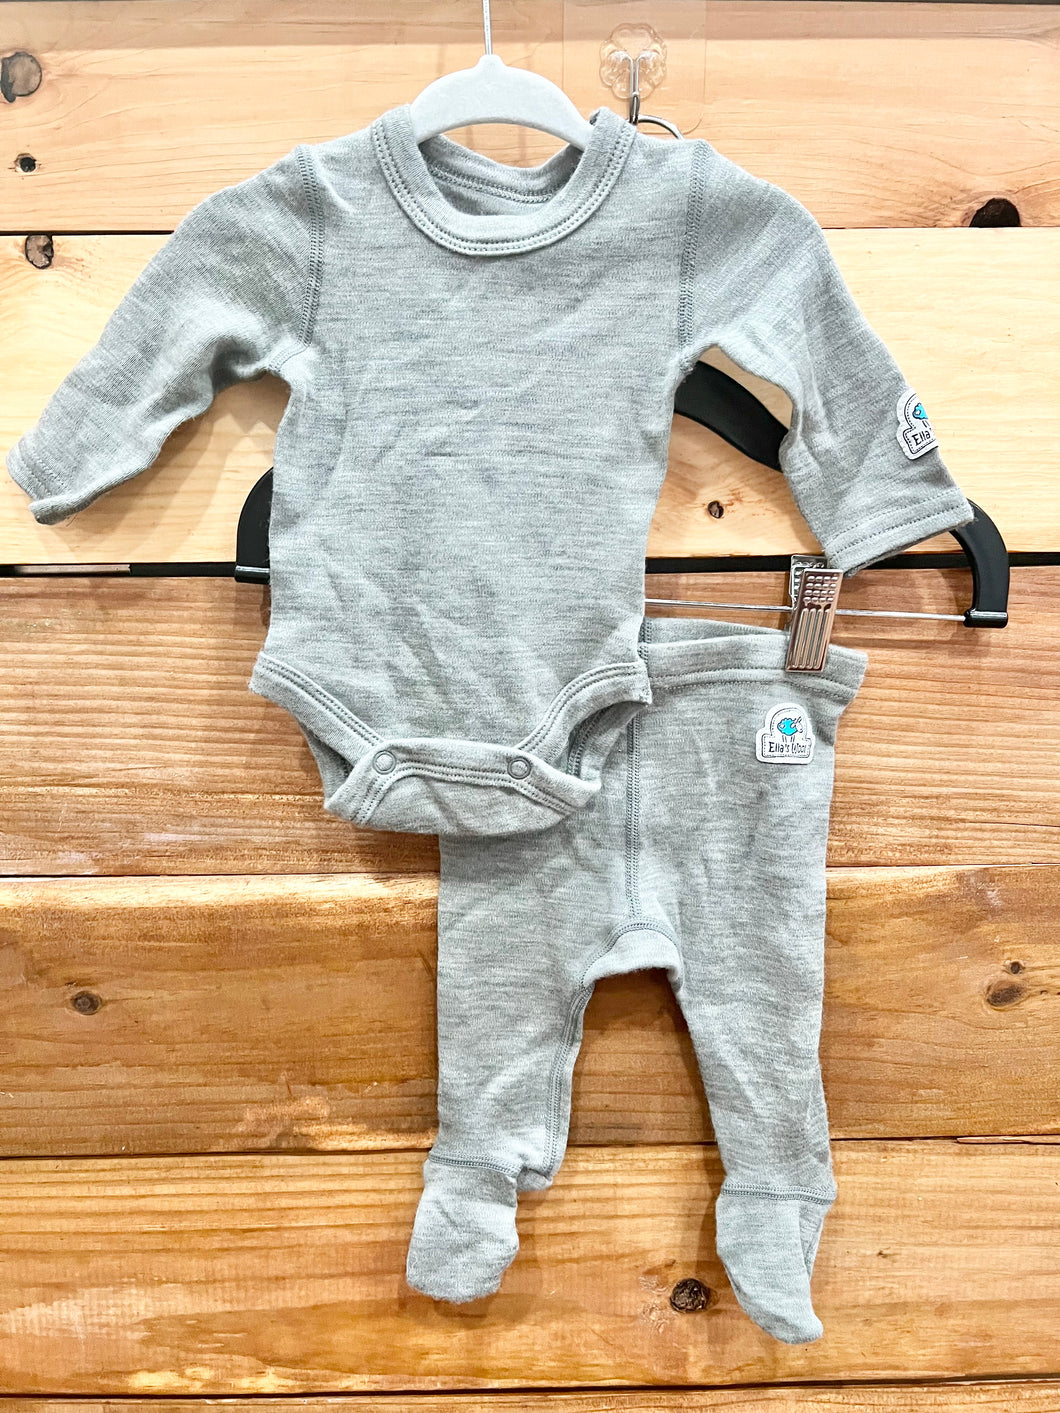 Ella's Wool 2pc Gray Outfit Size 3-6m